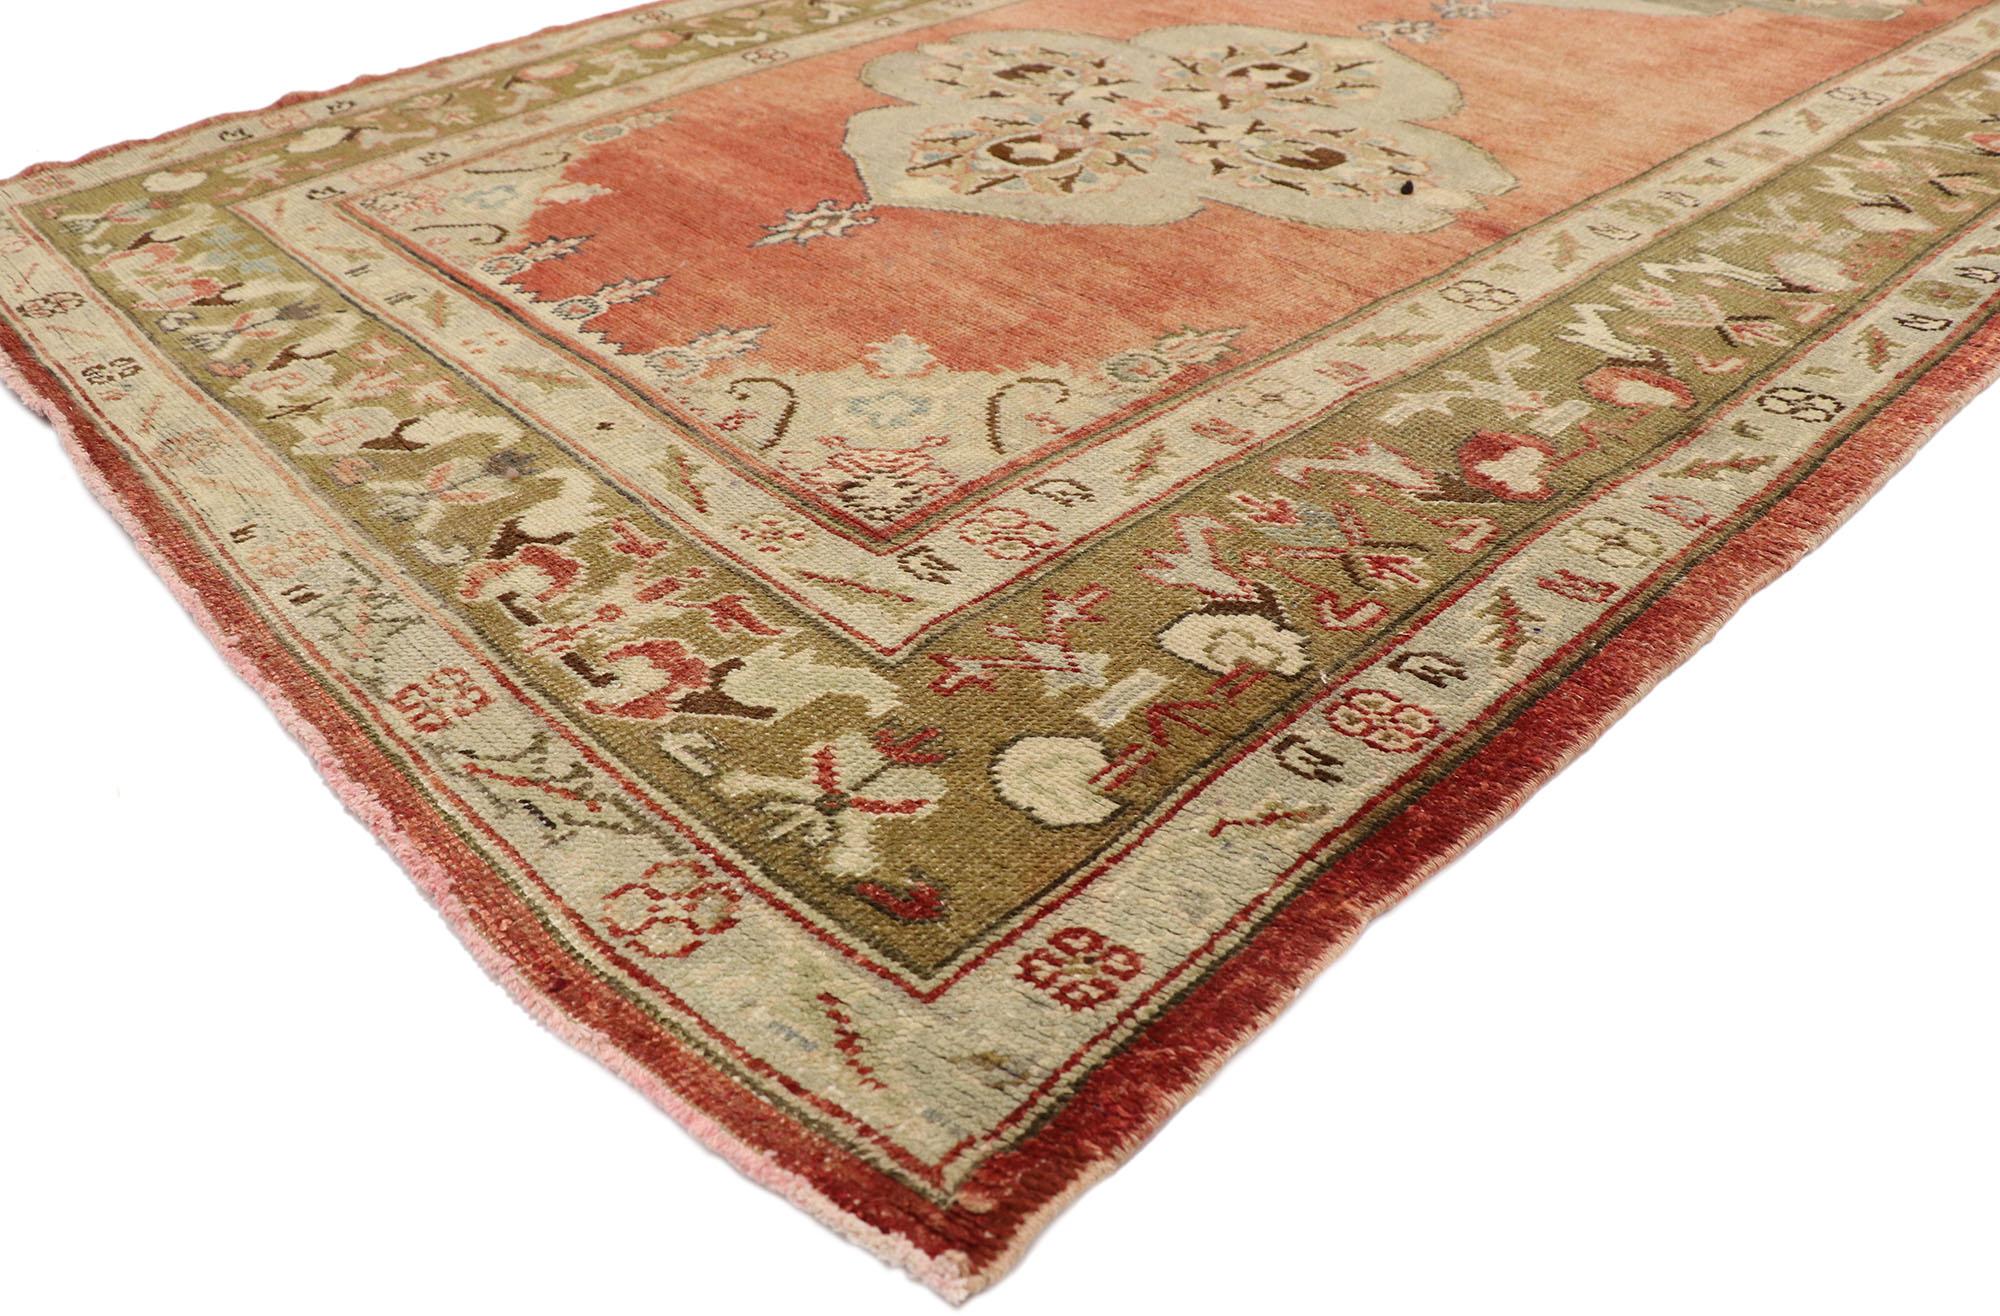 52171 Vintage Turkish Oushak Extra-Long Runner with Modern Tudor Style. This hand-knotted wool vintage Turkish Oushak runner features six cusped quatrefoil medallions patterned with blooming palmettes floating in an abrashed crimson field. Ornate